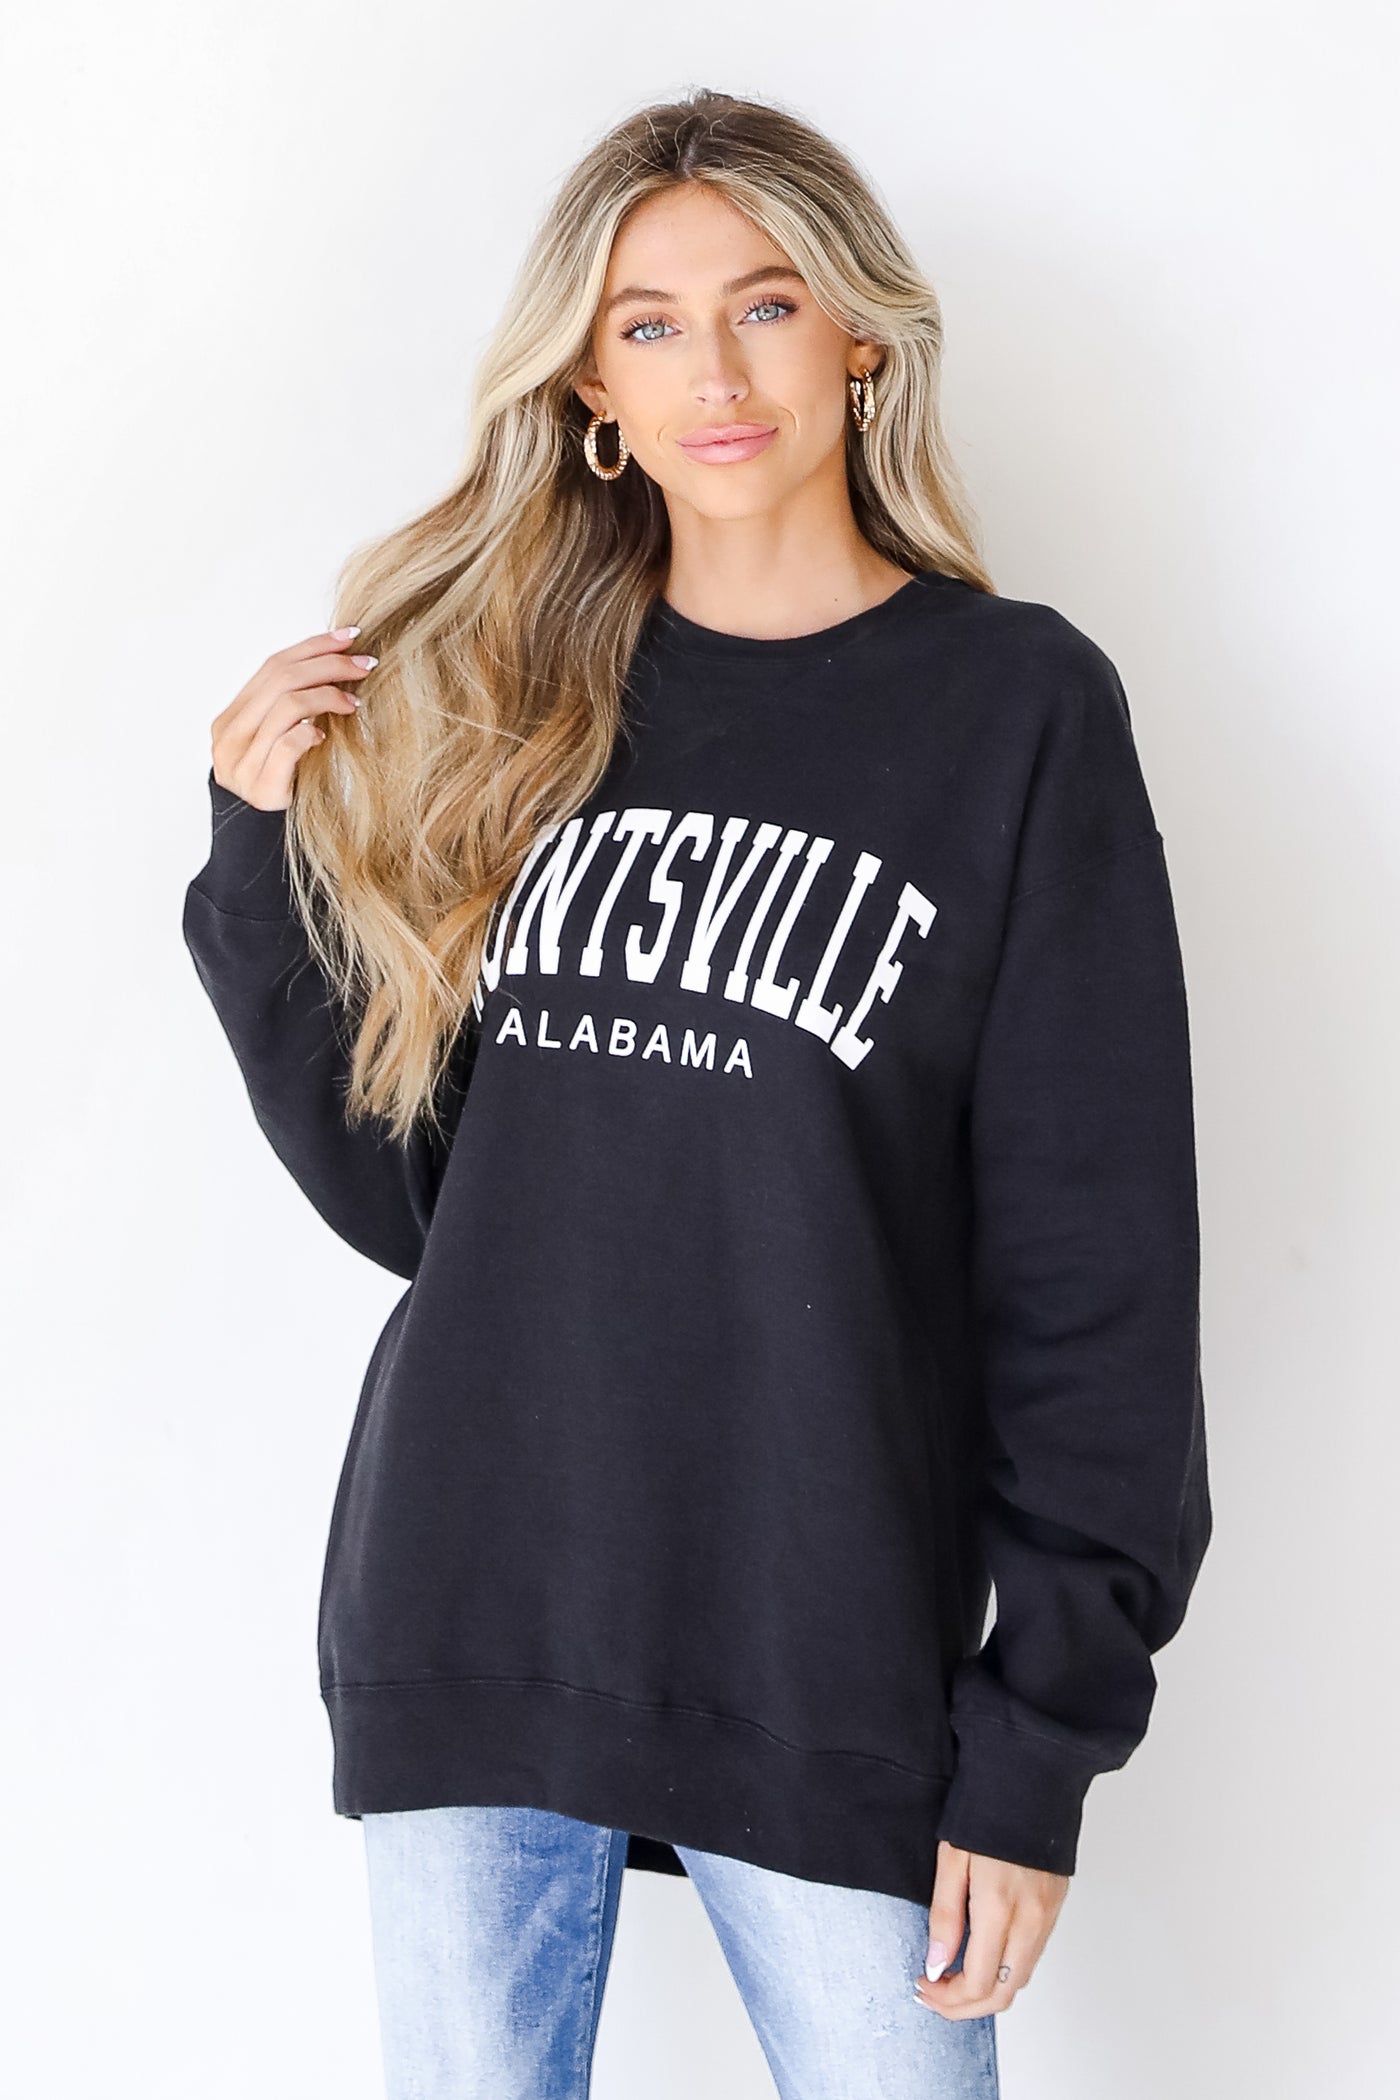 Huntsville Alabama Pullover front view